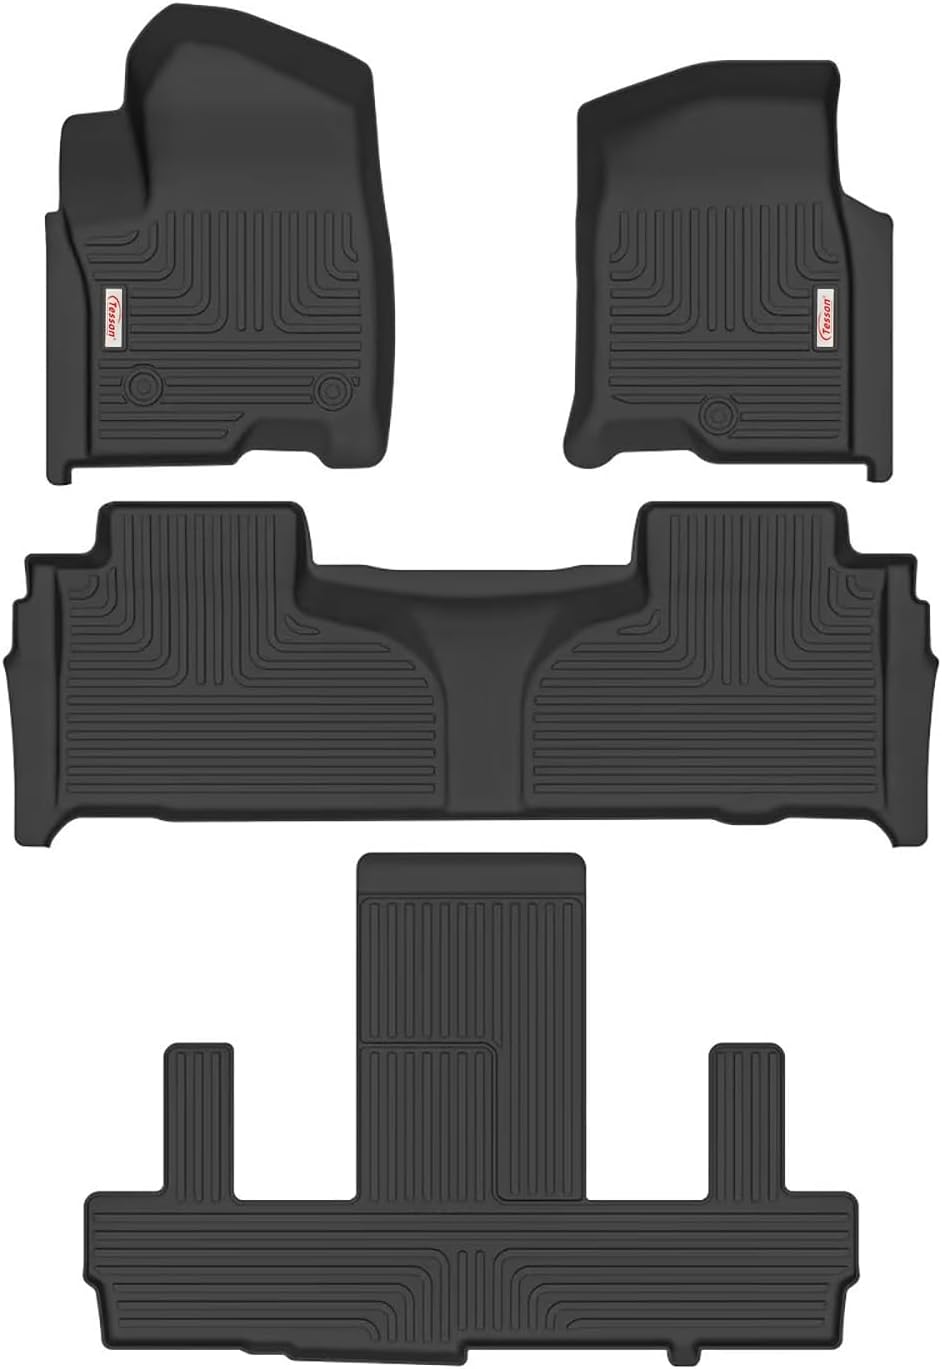 3 Row Liners Set Black Custom Fit for 7 Seats 2021-2023 Chevy Chevrolet Suburban/GMC Yukon XL/Cadillac Escalade with 2nd Row Bucket Seats,All Weather Car Mats